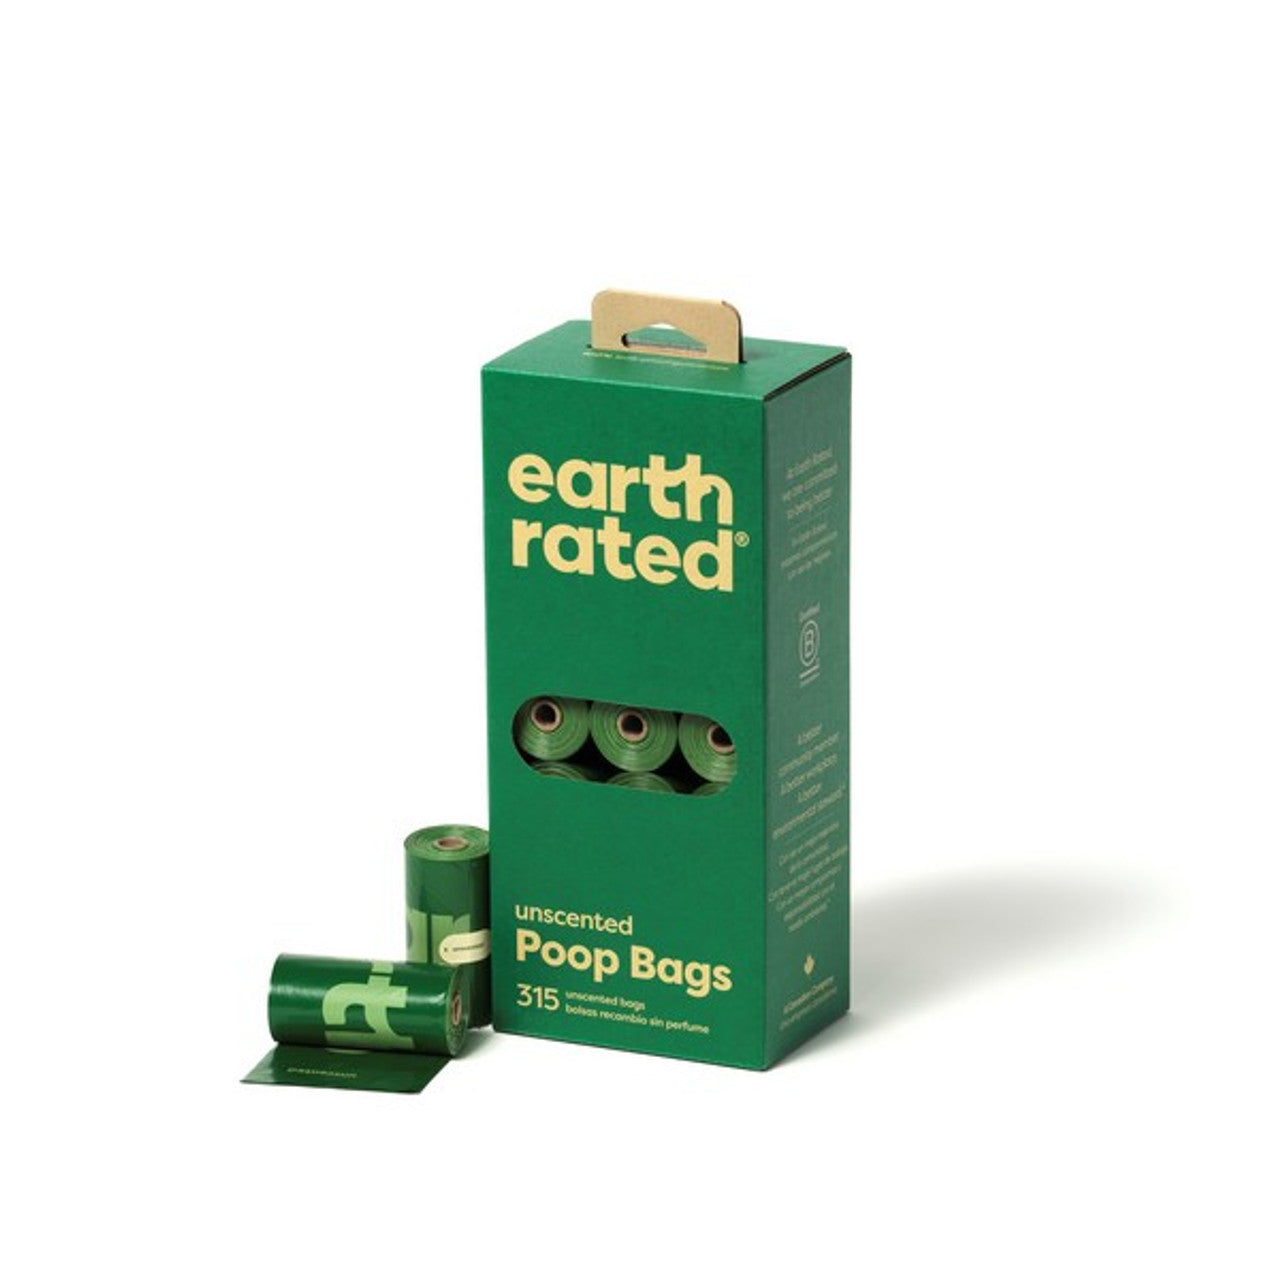 Earth Rated Poop Bags 315 Bags on 21 Refill Rolls